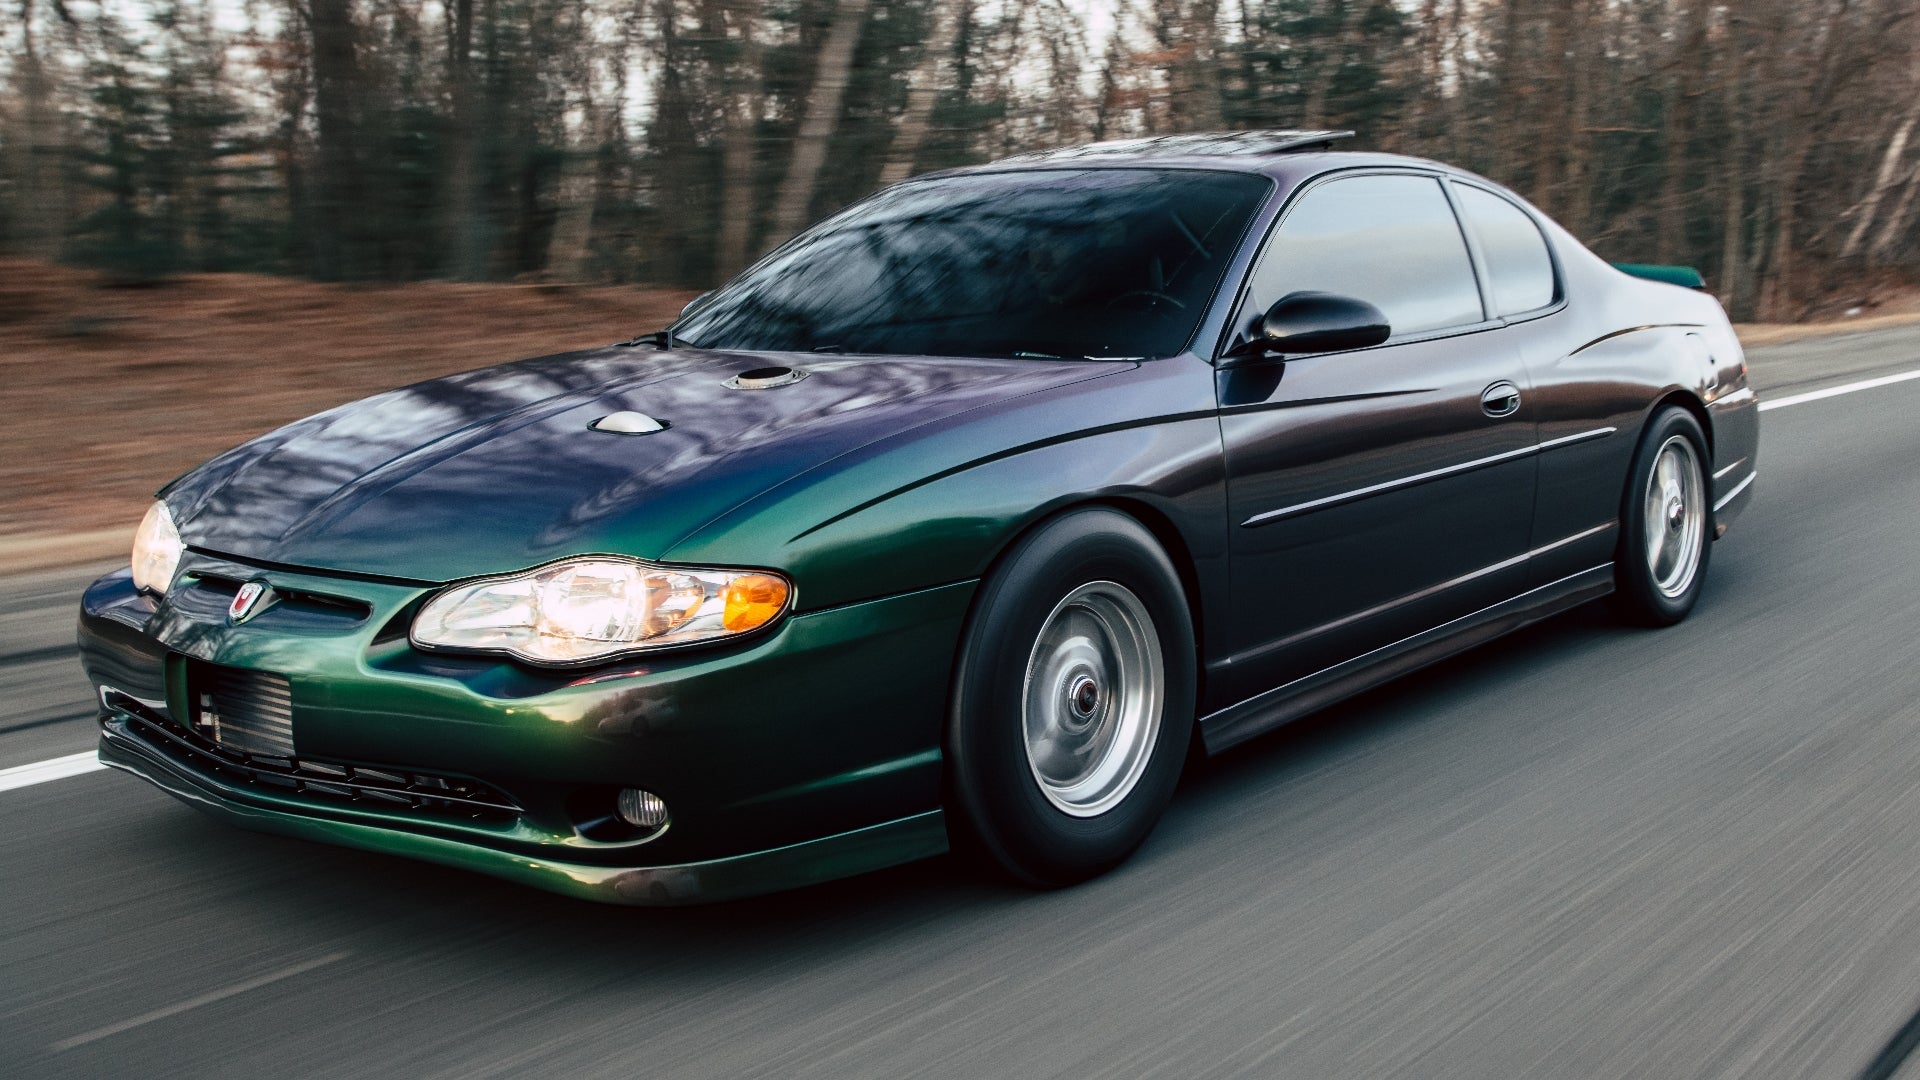 Turbo LS-Swapped 2004 Chevrolet Monte Carlo Makes 766 HP at the Front